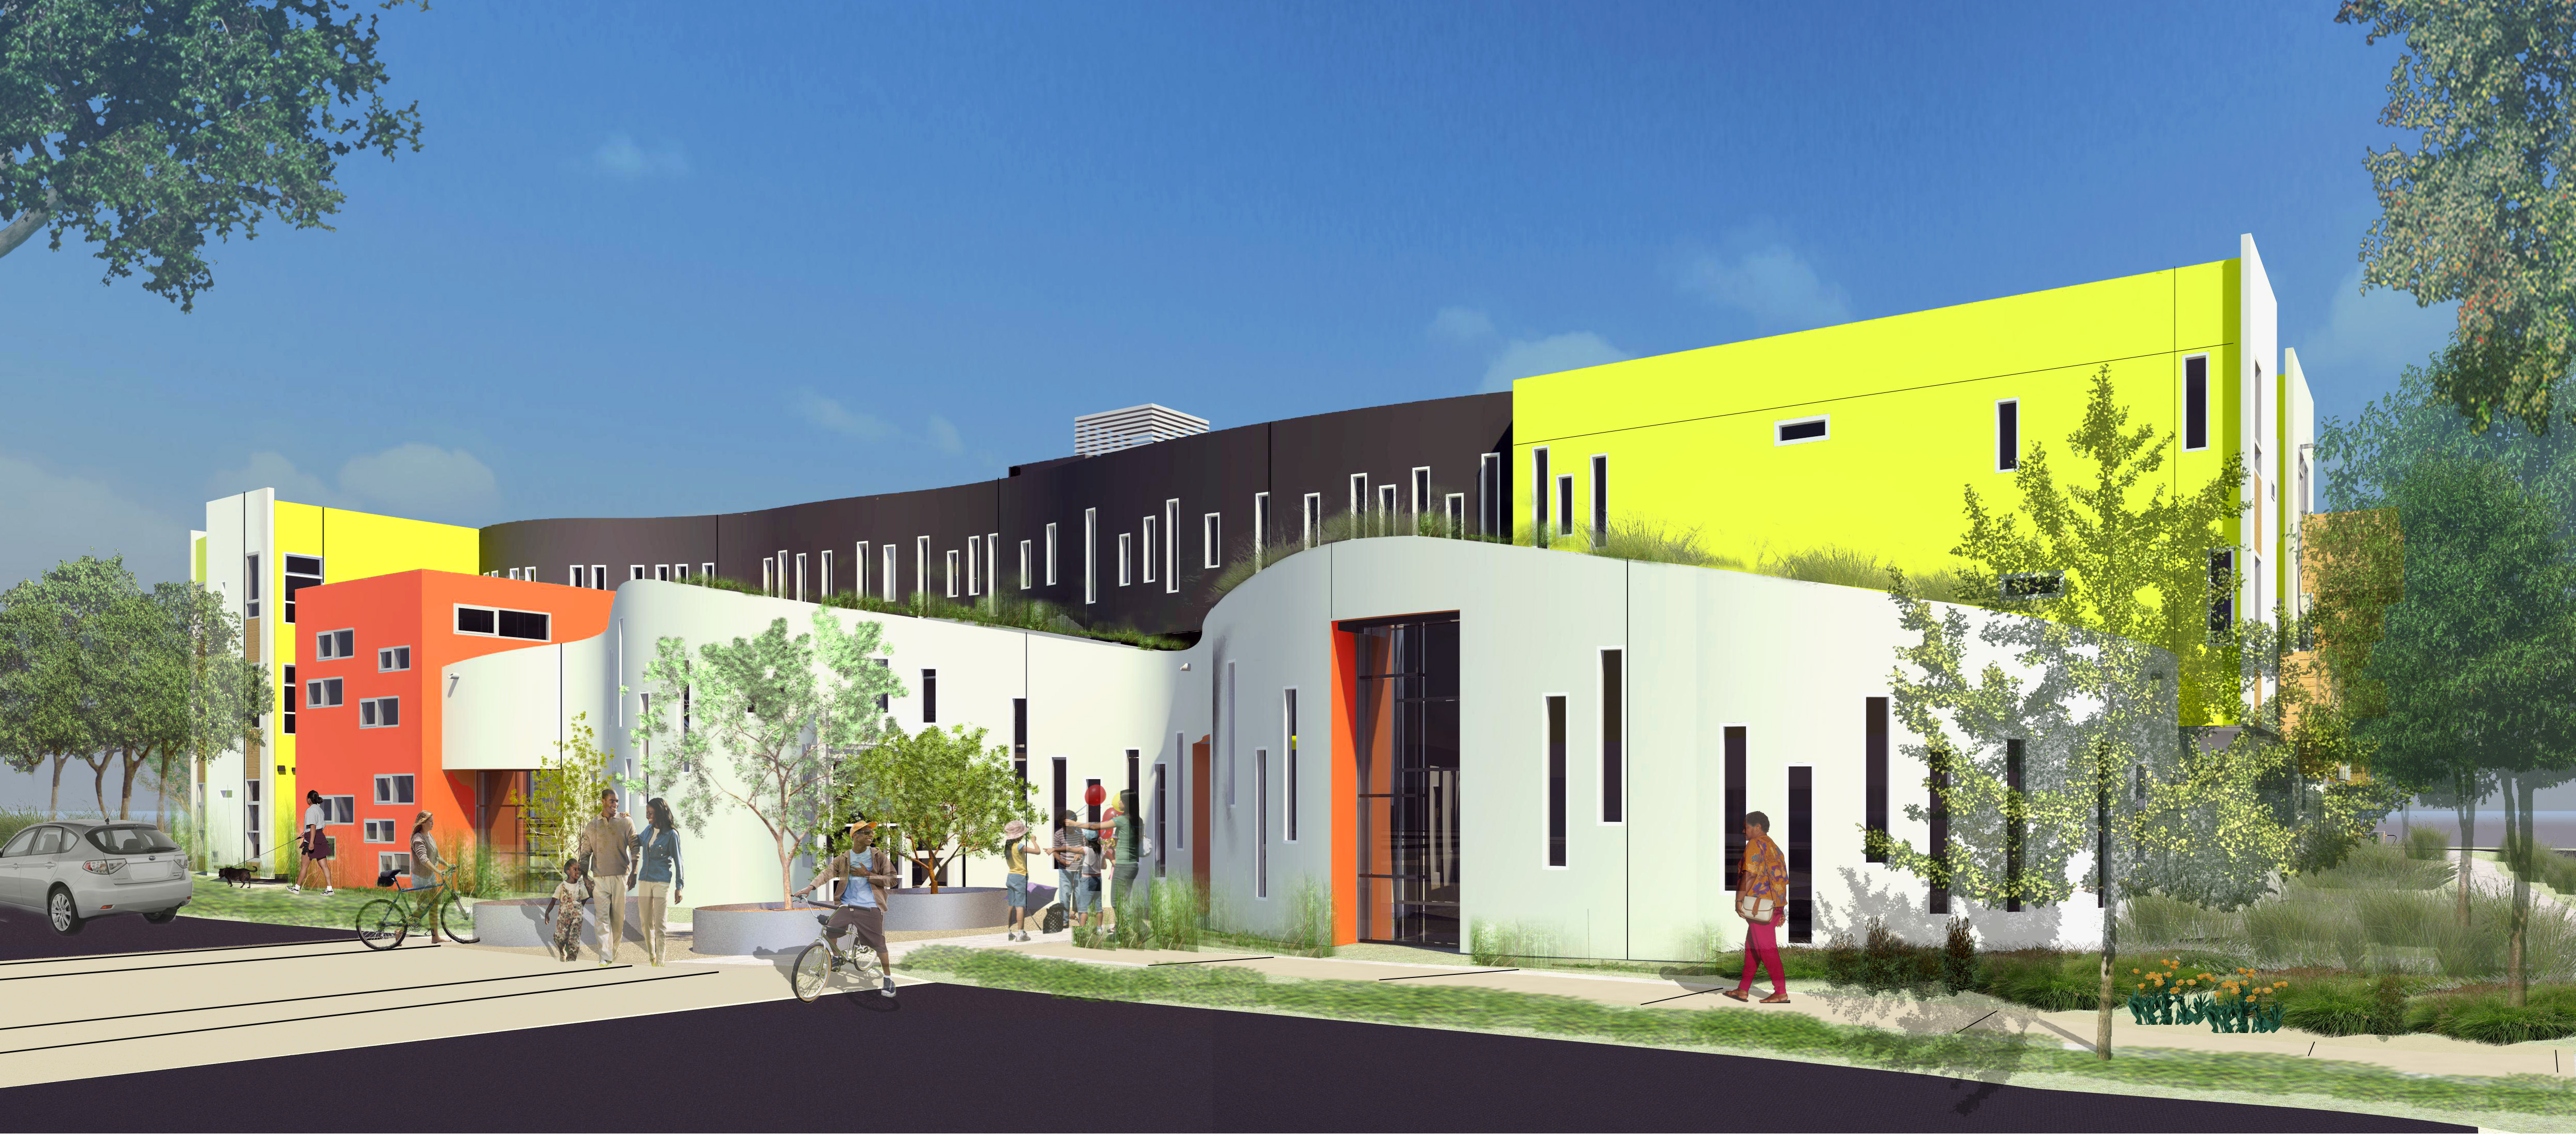 Rendering of community and apartments building for Tassafaronga Village in East Oakland, CA. 